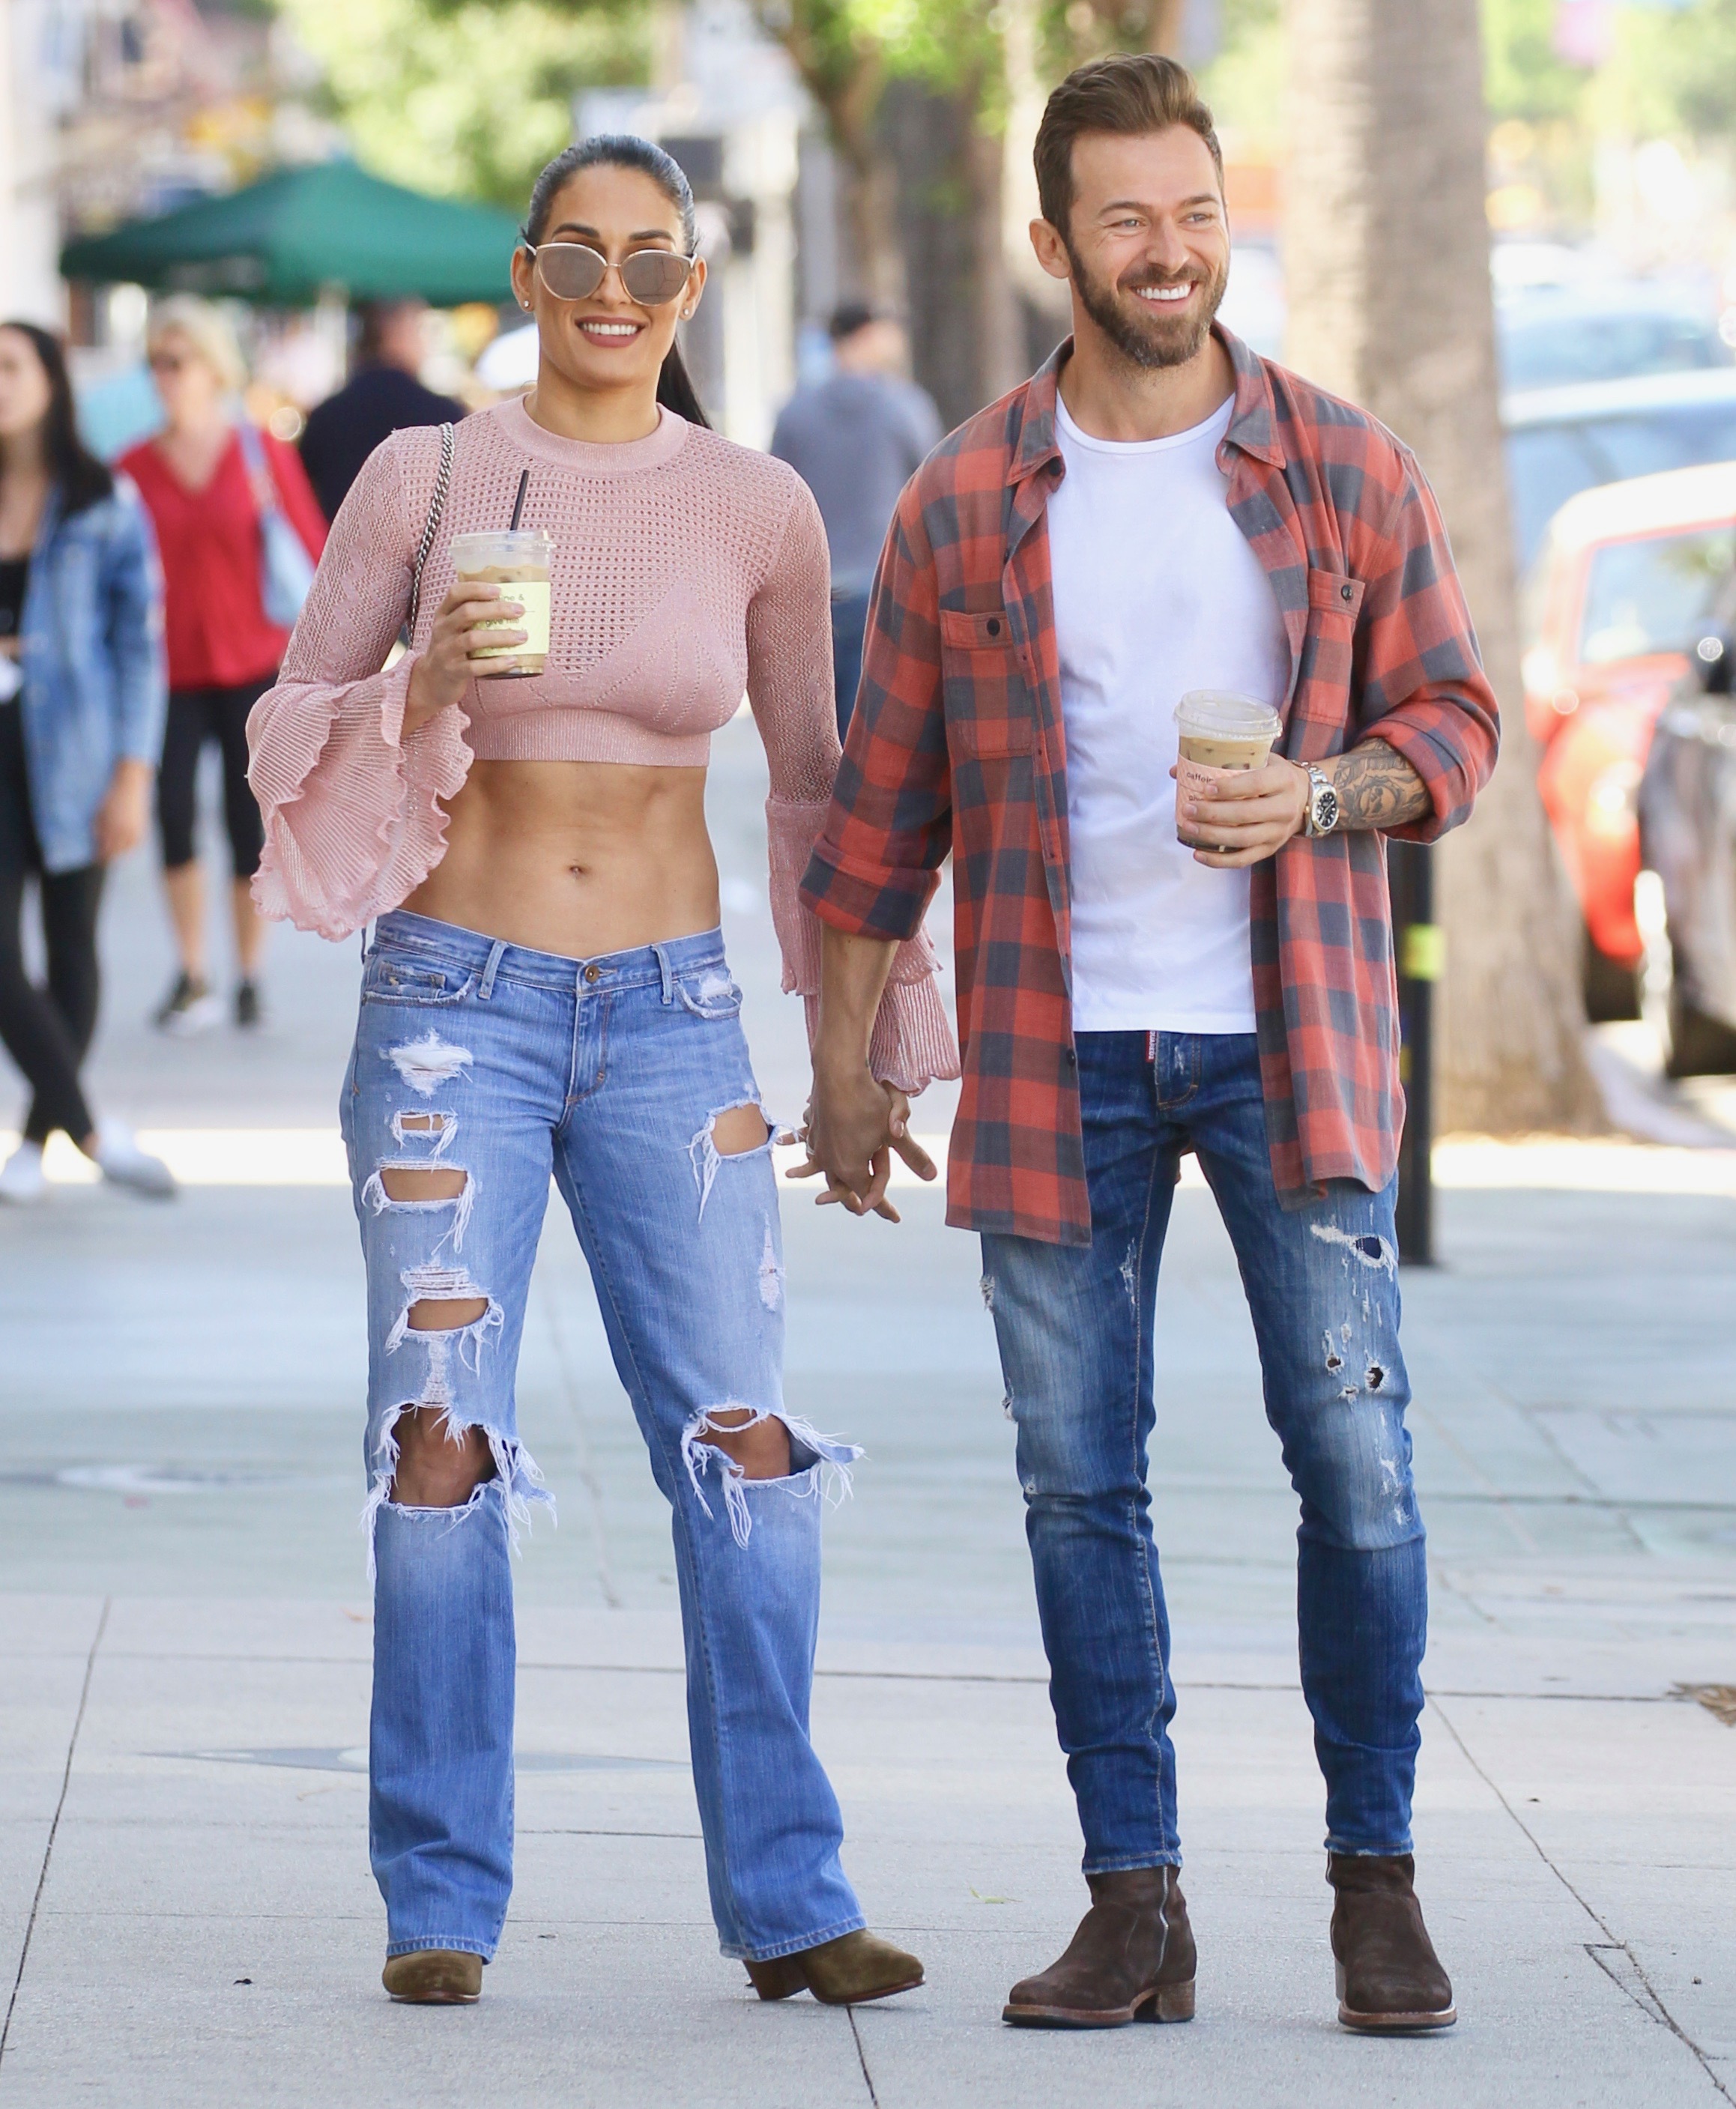 Nikki Bella and Artem Chigvintsev Share a Sweet Kiss in L.A.